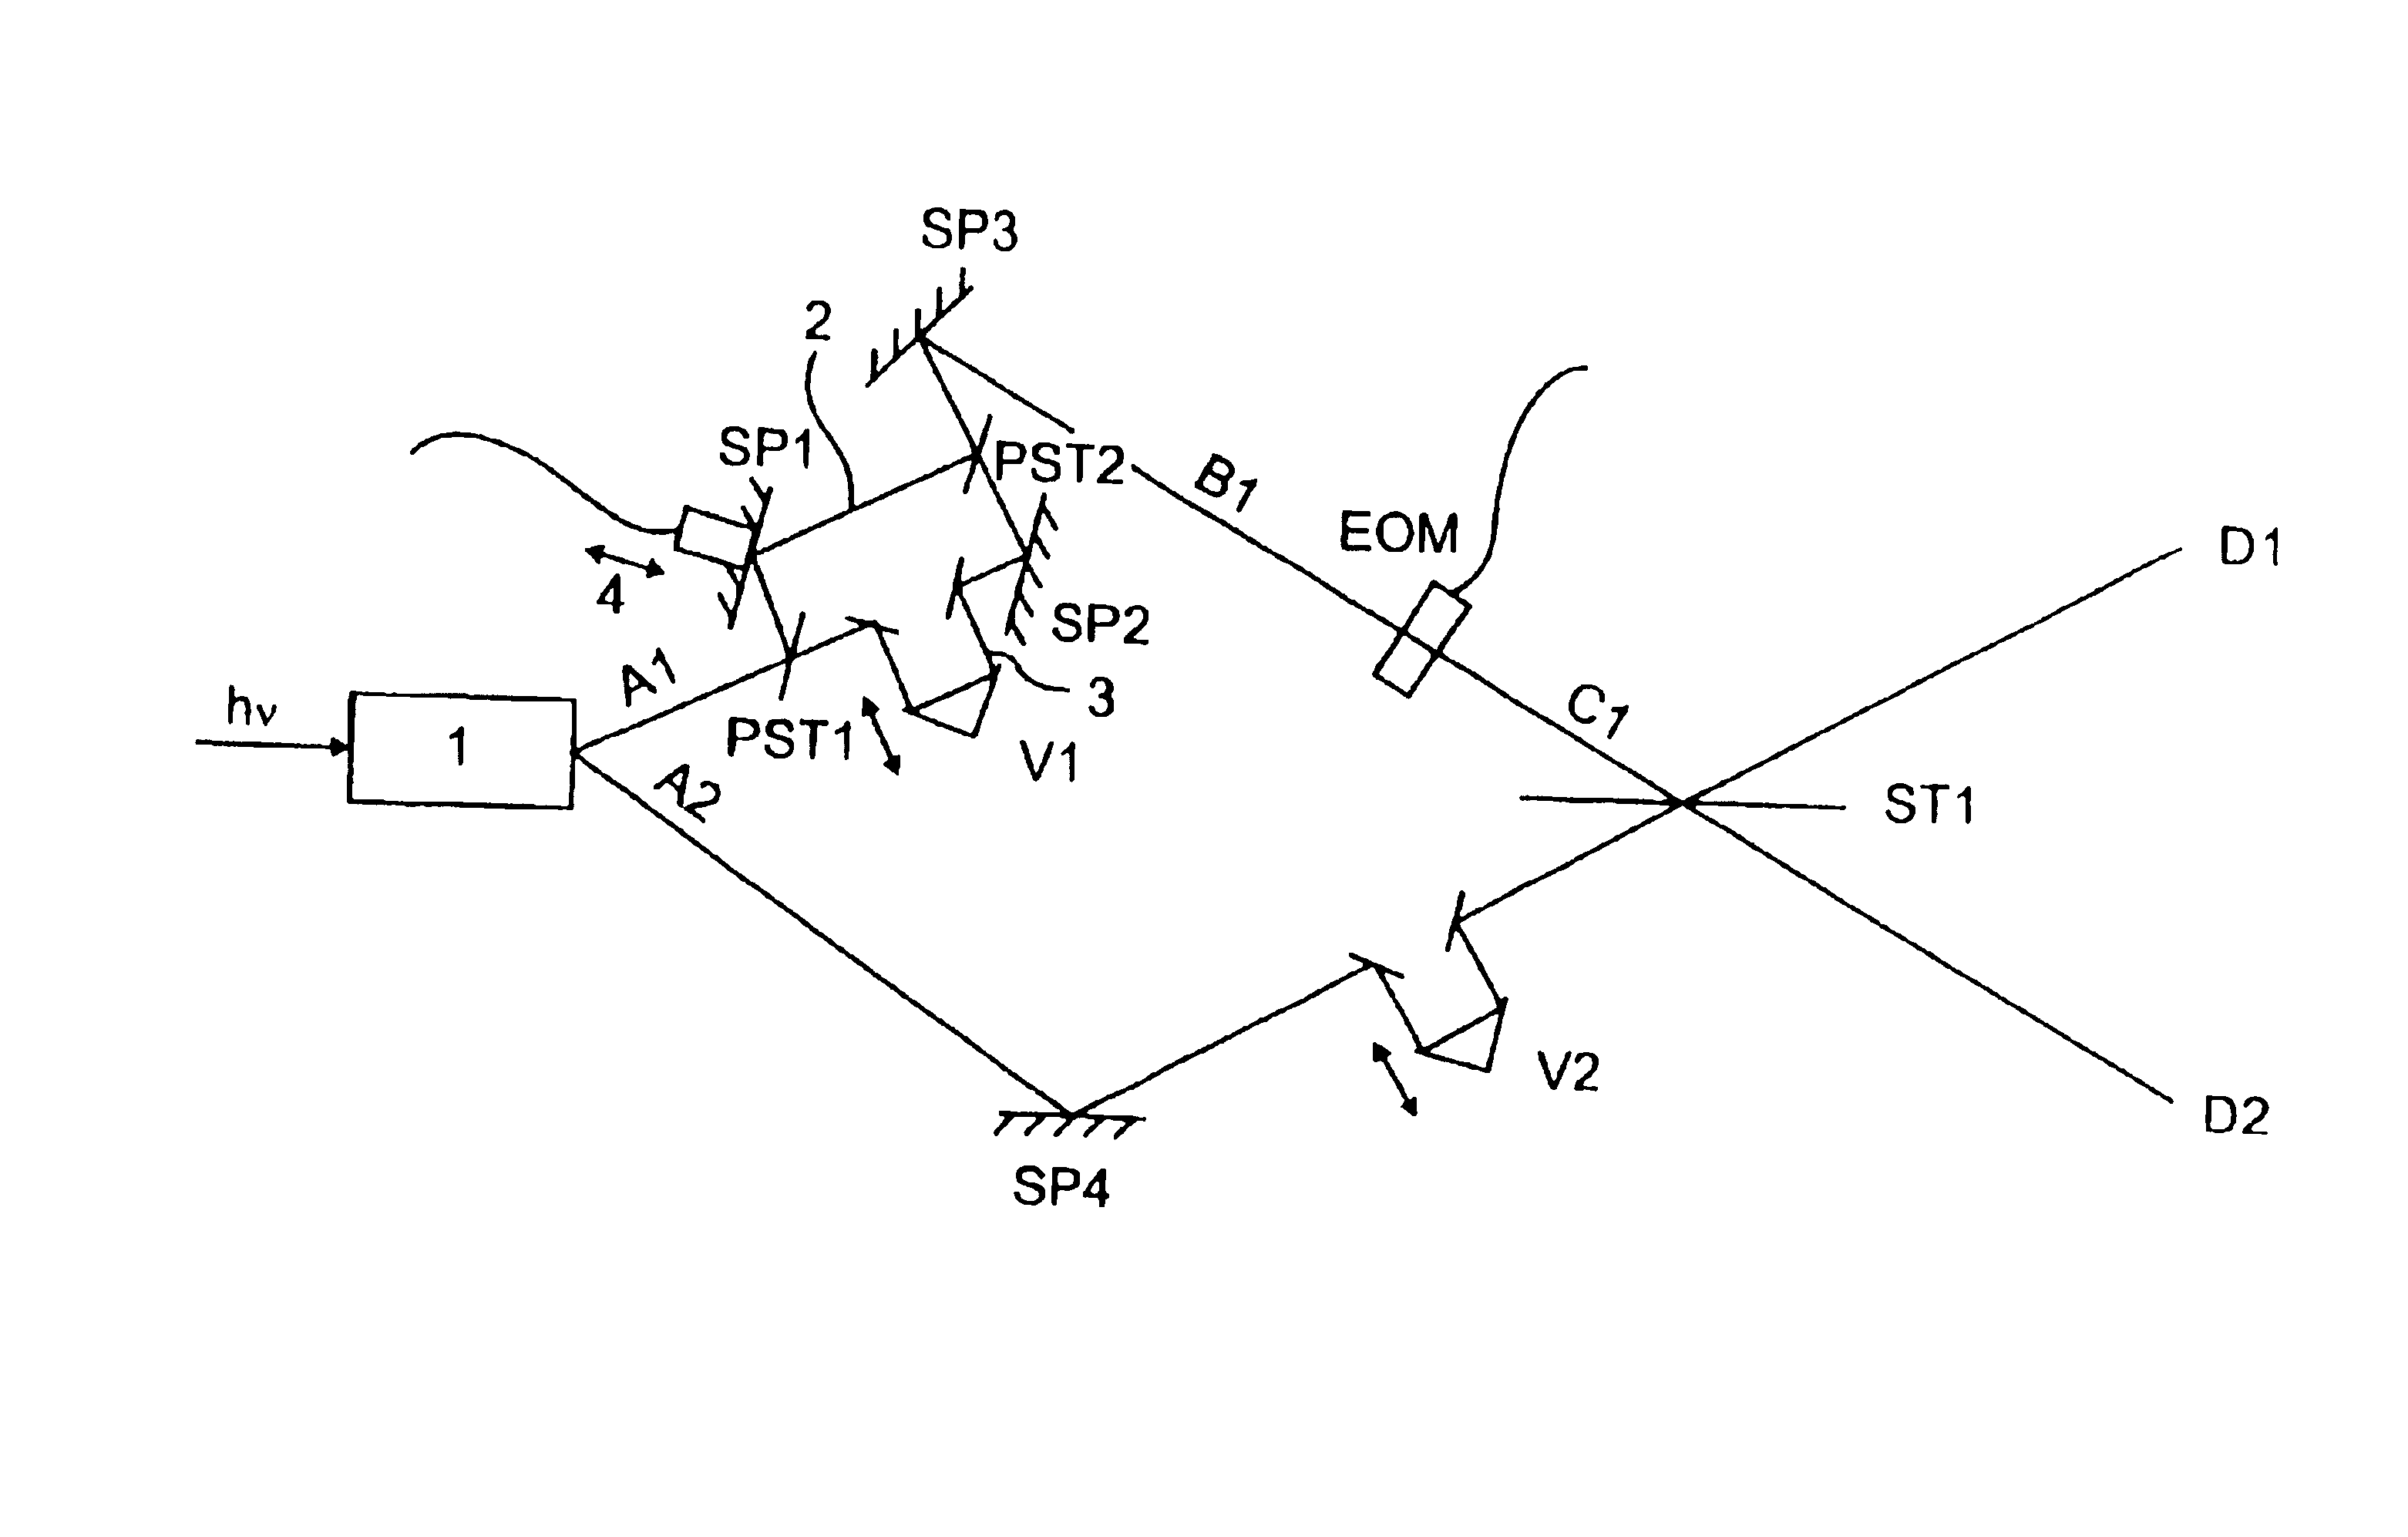 Method for changing the polarization of at least one of the photons emitted from a photon-pair source into various partial paths of rays, and method for optionally generating individual photons or photon pairs in an optical channel